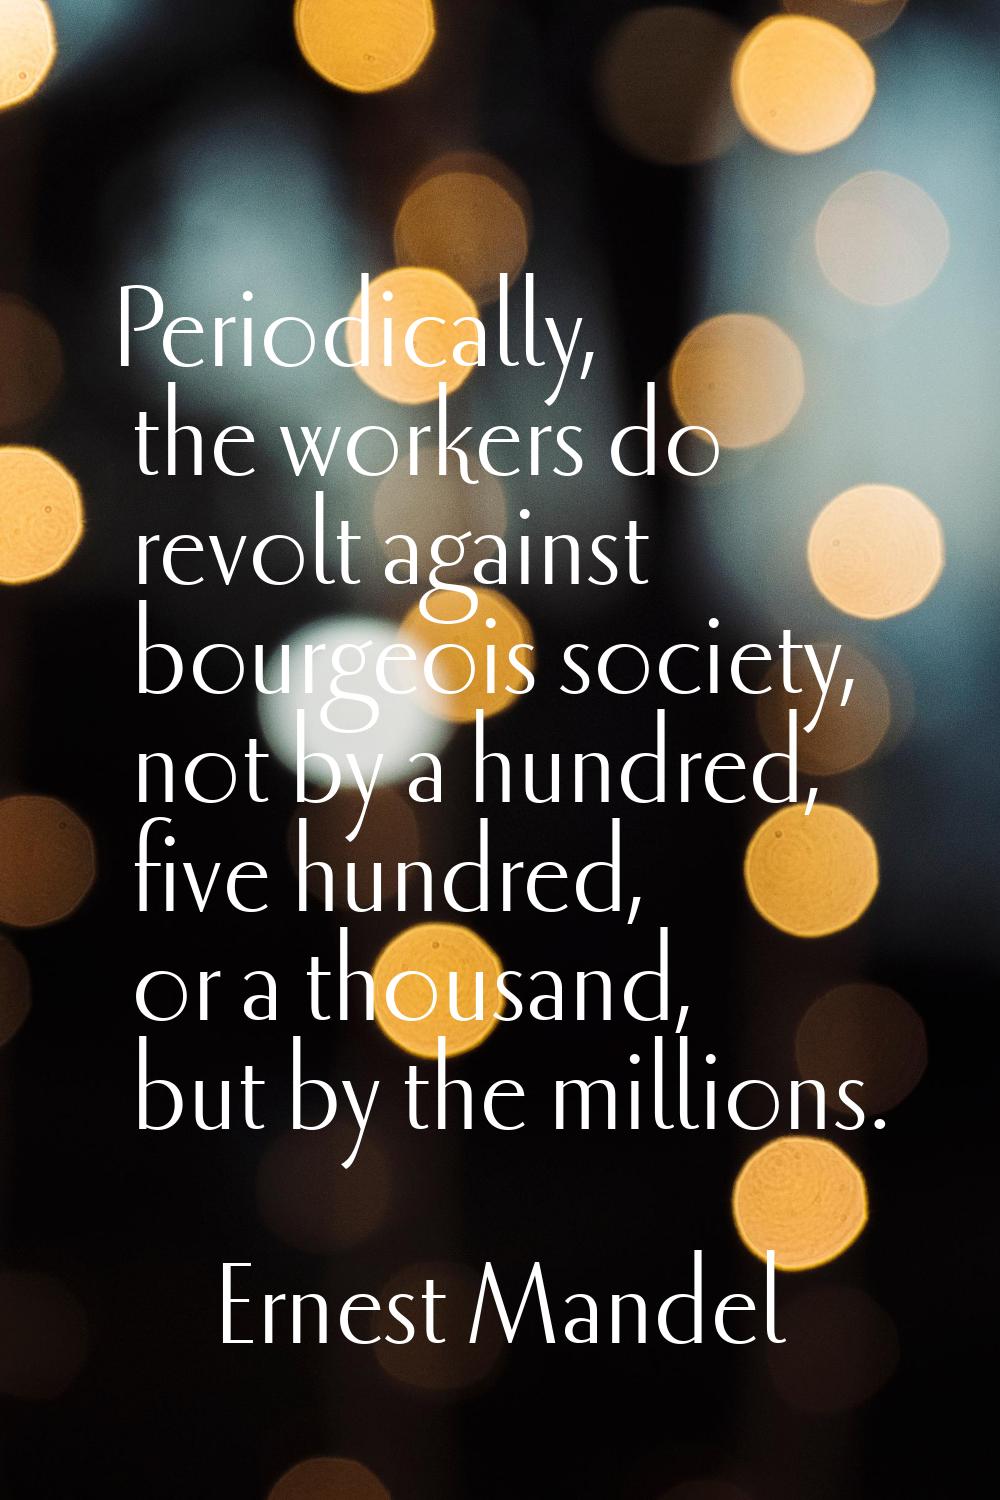 Periodically, the workers do revolt against bourgeois society, not by a hundred, five hundred, or a